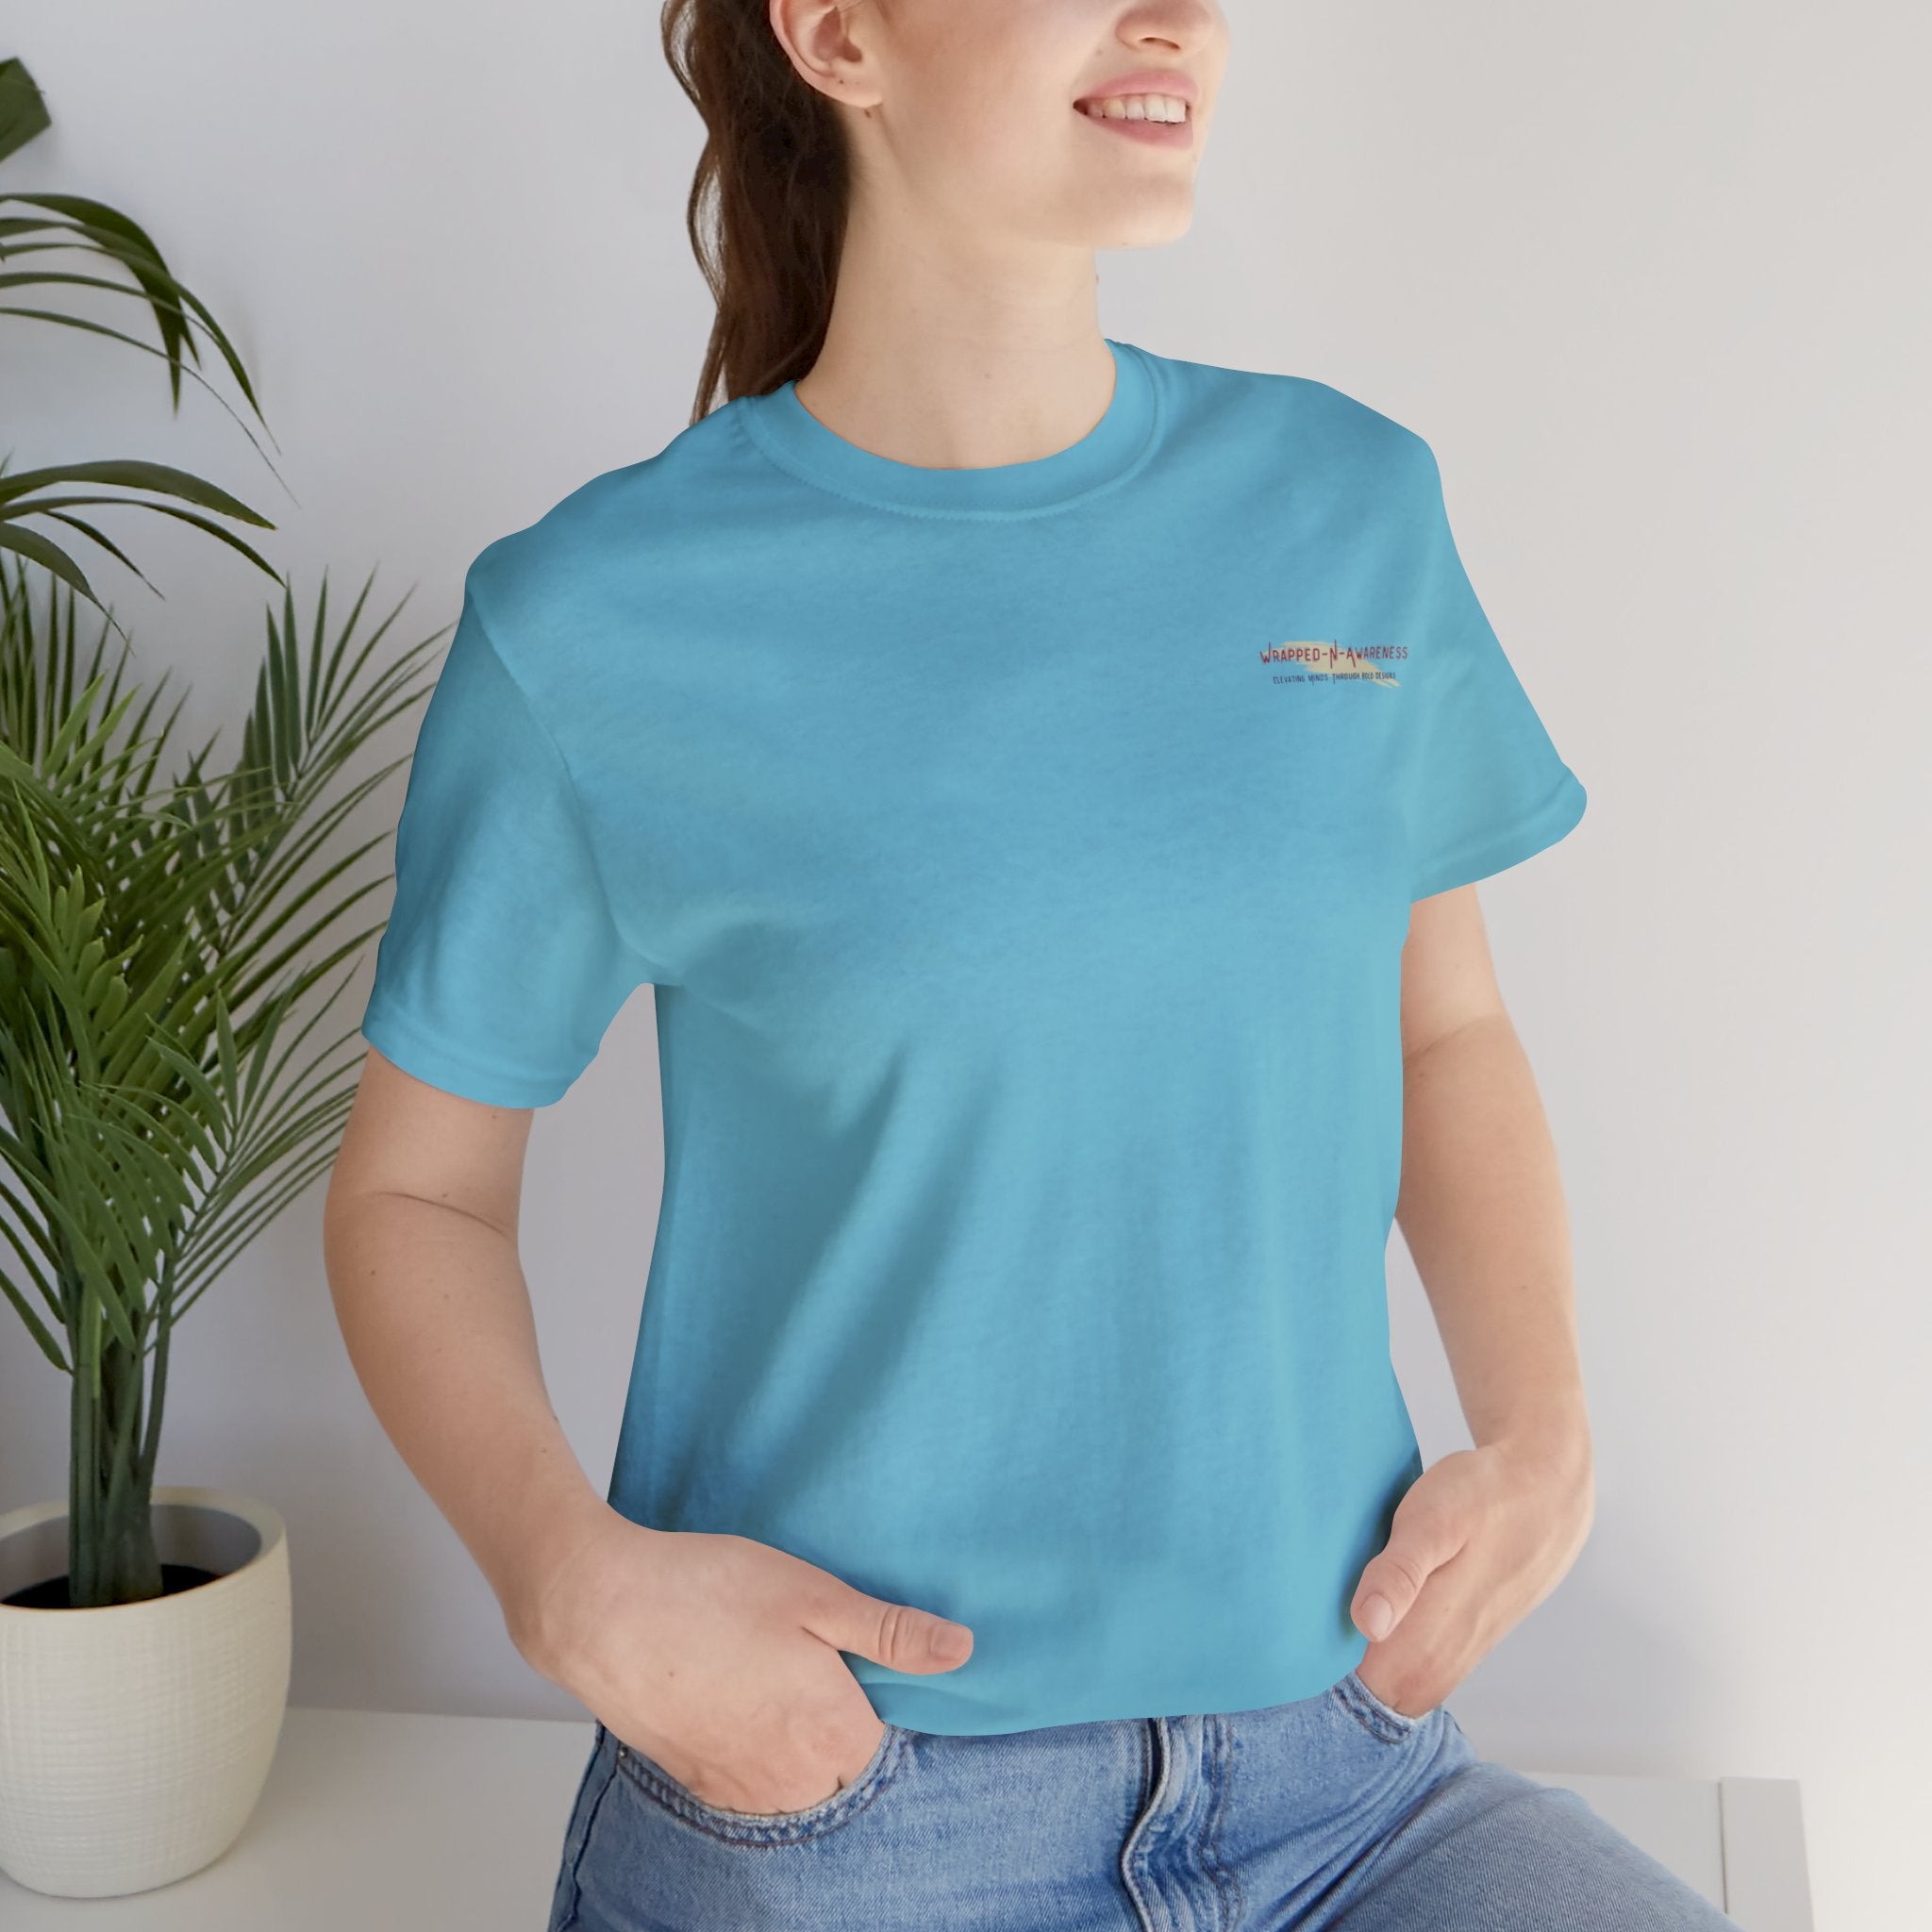 Release Your Mind Jersey Tee - Bella+Canvas 3001 Heather Mauve Airlume Cotton Bella+Canvas 3001 Crew Neckline Jersey Short Sleeve Lightweight Fabric Mental Health Support Retail Fit Tear-away Label Tee Unisex Tee T-Shirt 3202245715788726663_2048 Printify